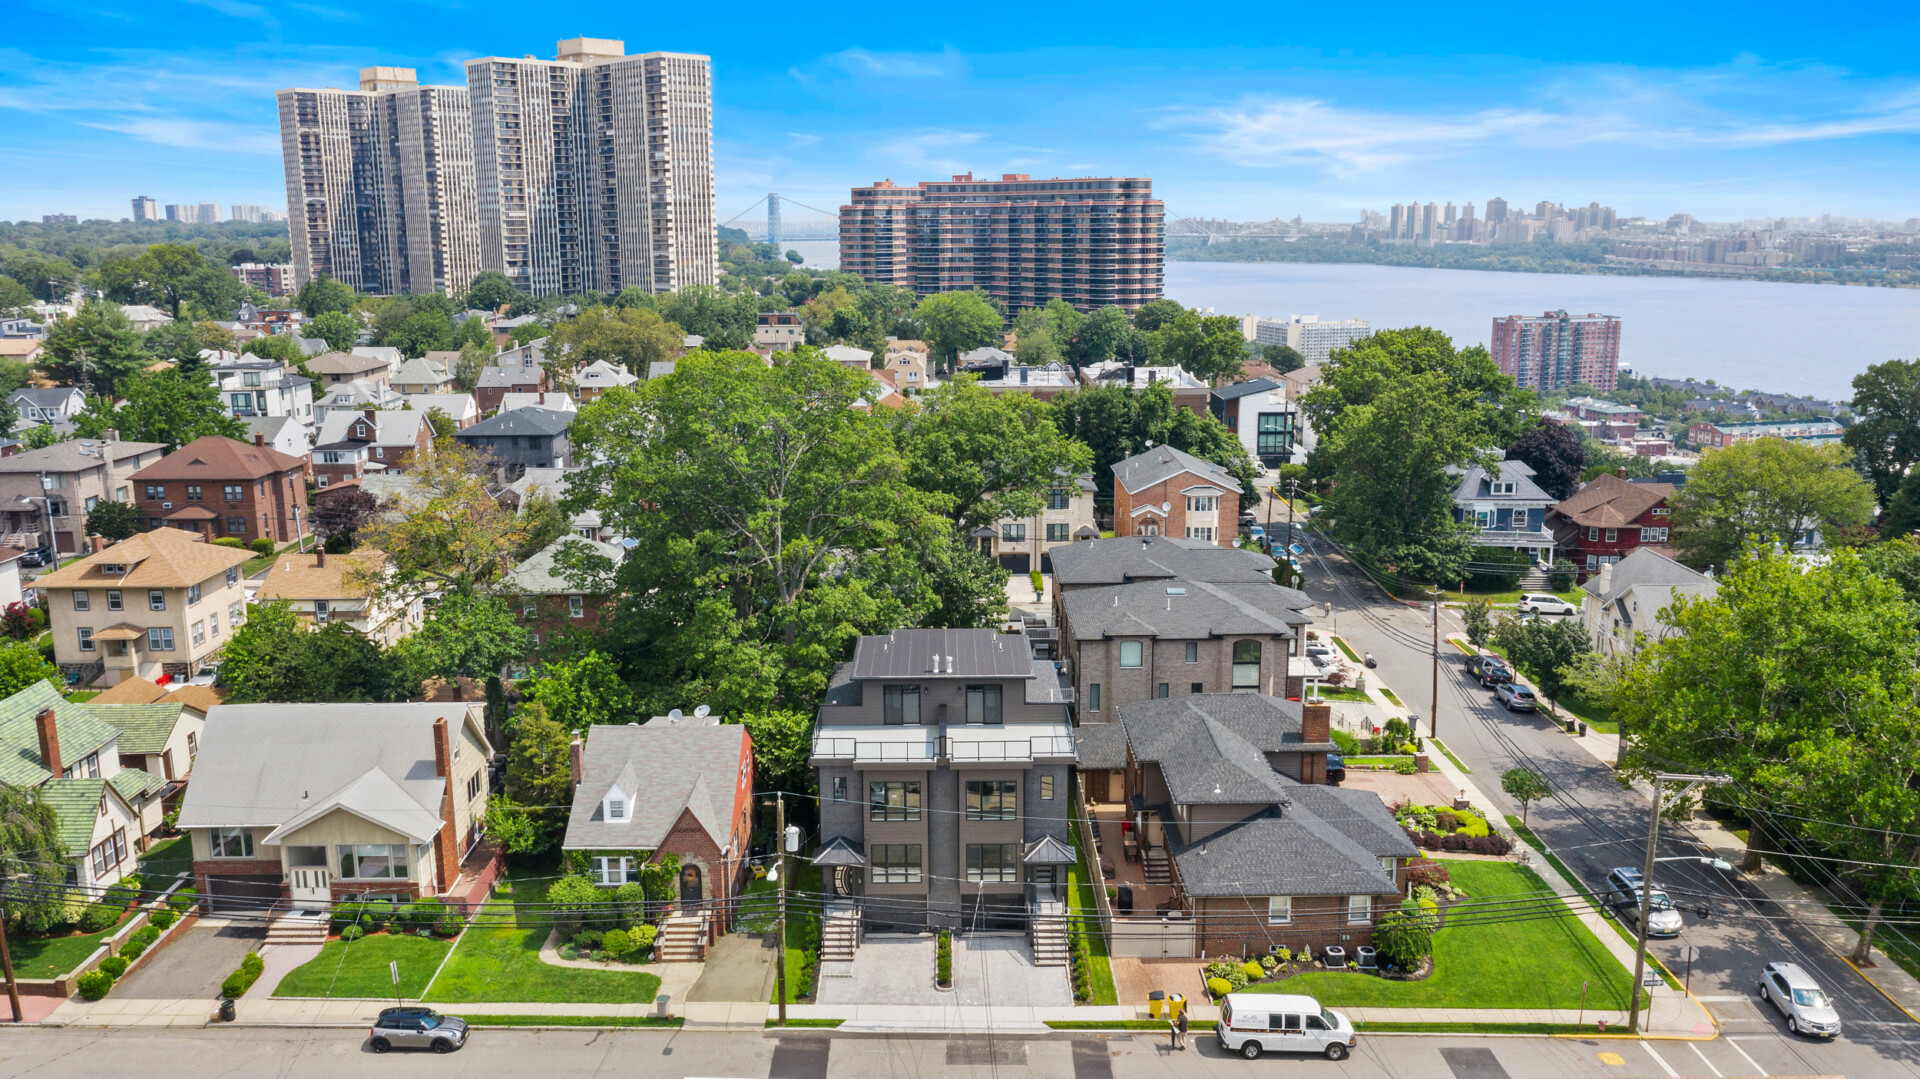 Real Estate Drone Photography & Video in NJ NYC - 24 hour turnaround!